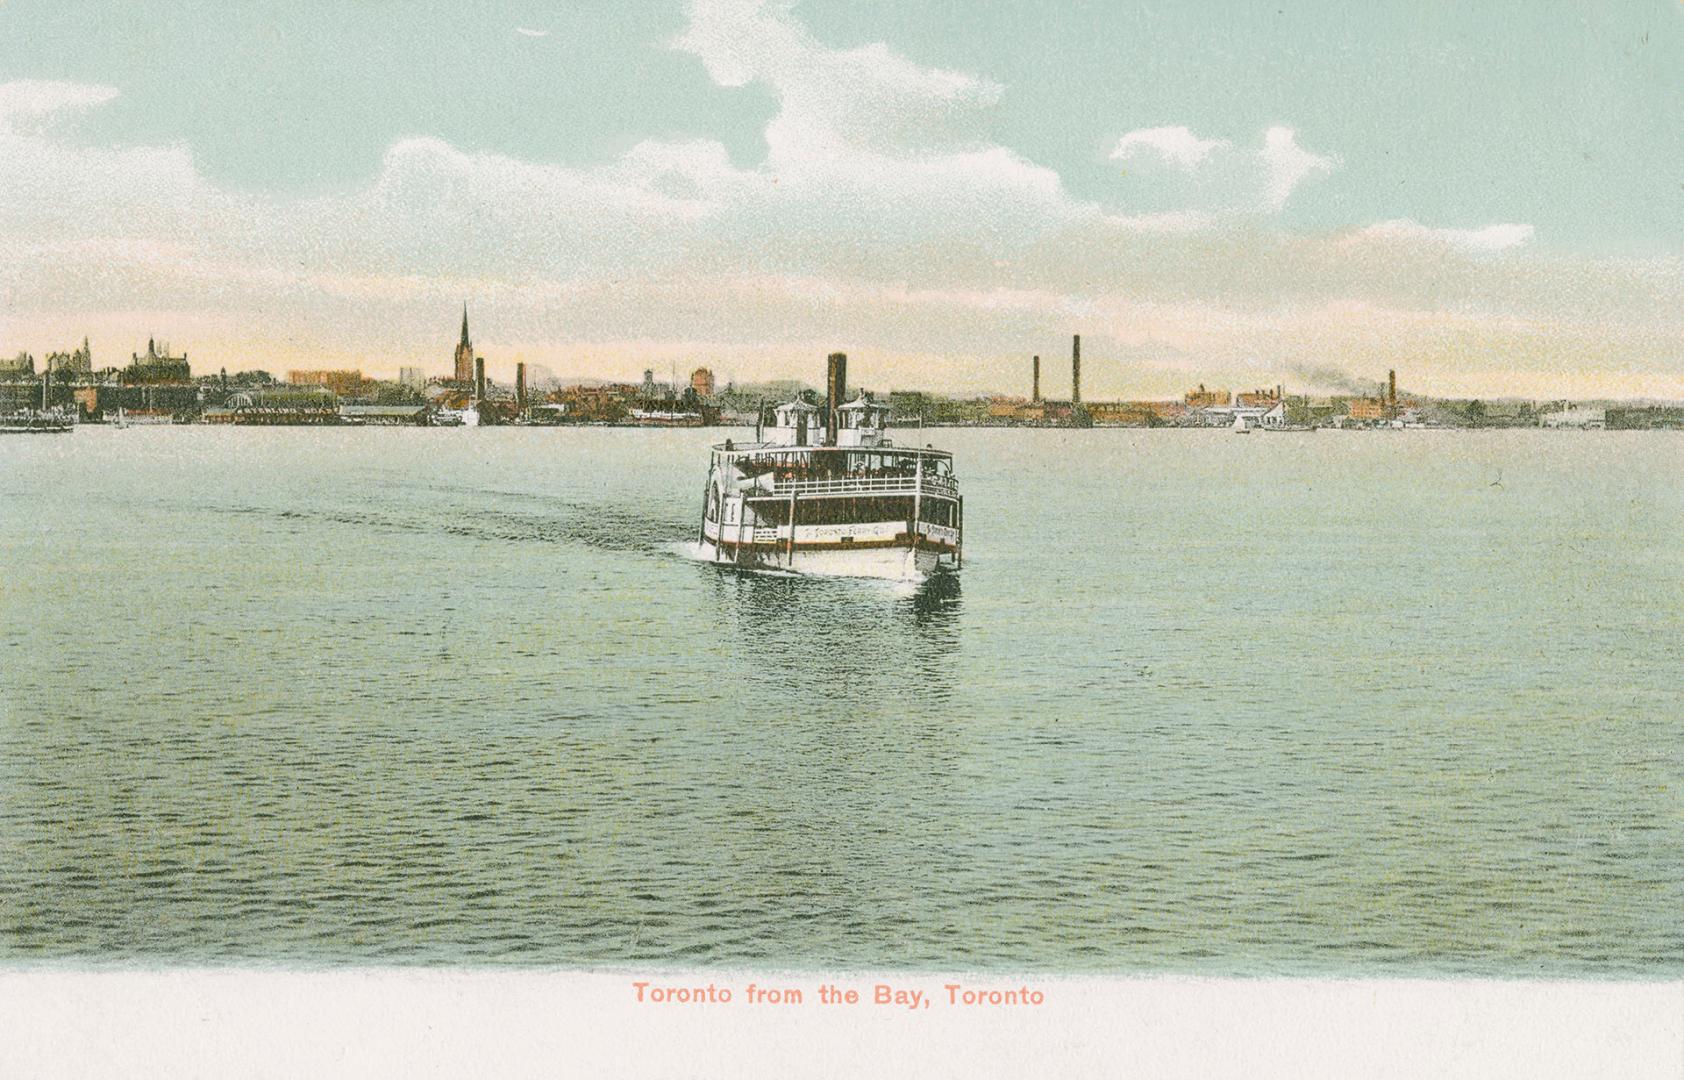 Image shows a boat on the lake with Toronto buildings in the background.